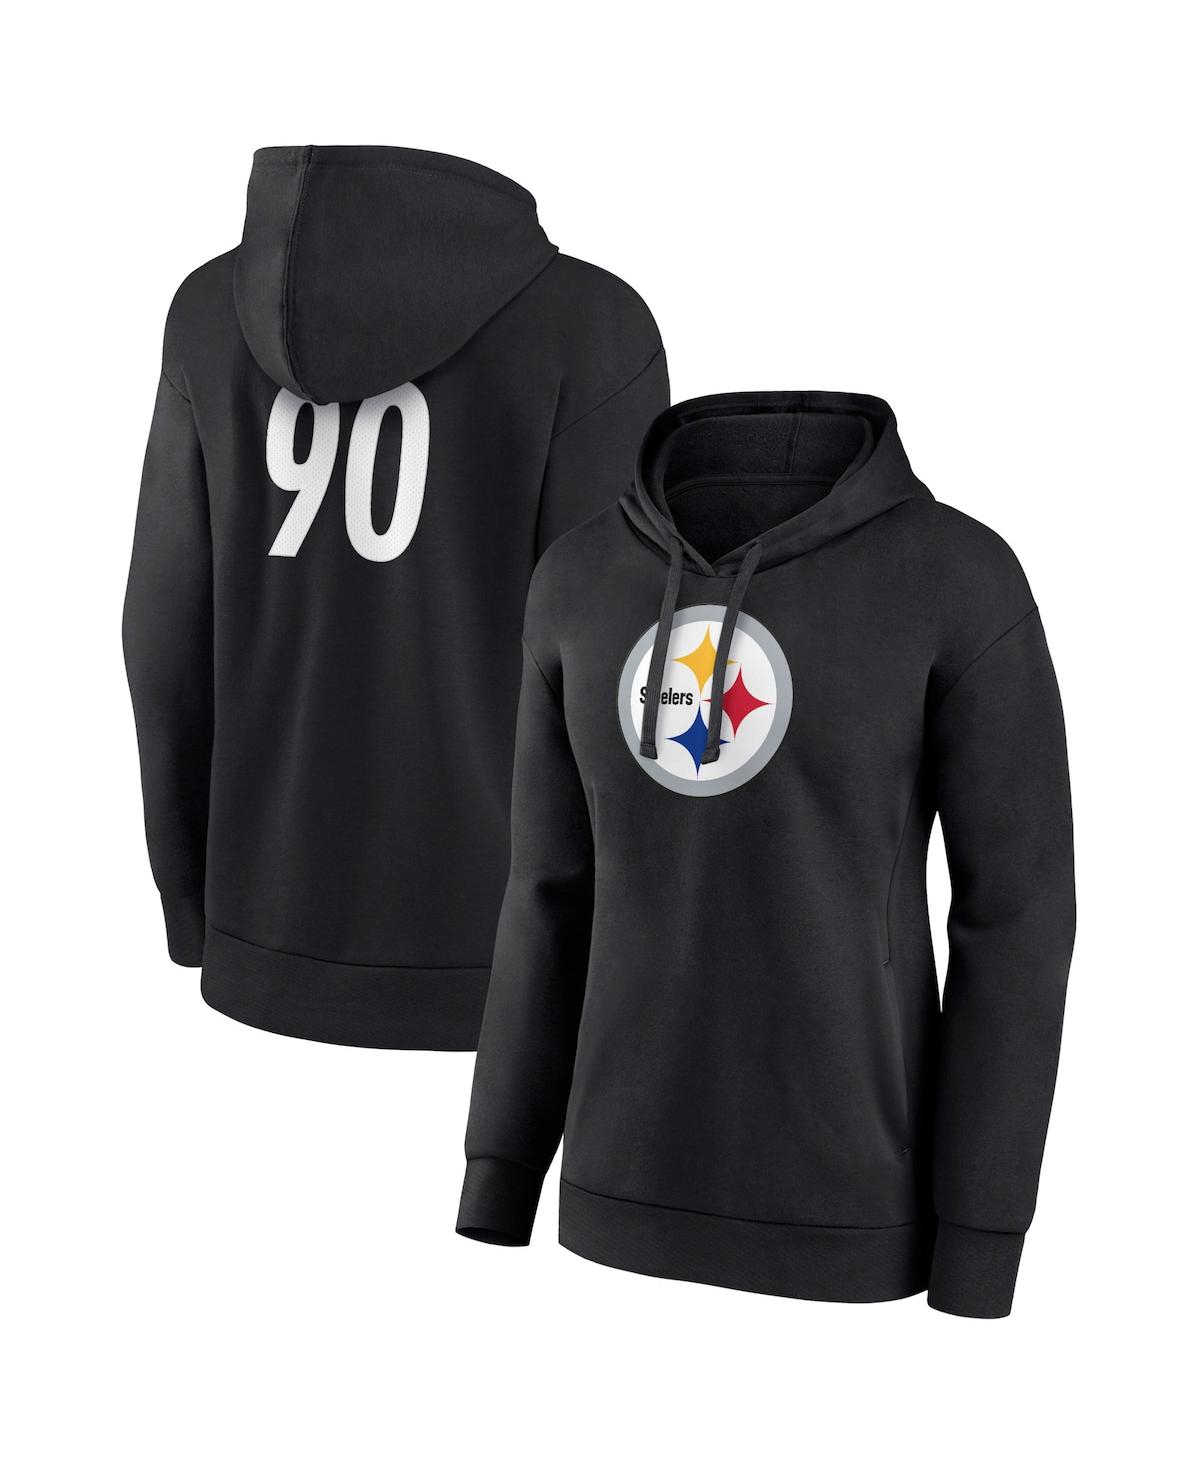 Women's Fanatics Branded T.j. Watt Black Pittsburgh Steelers Player Icon Name and Number Pullover Hoodie - Black